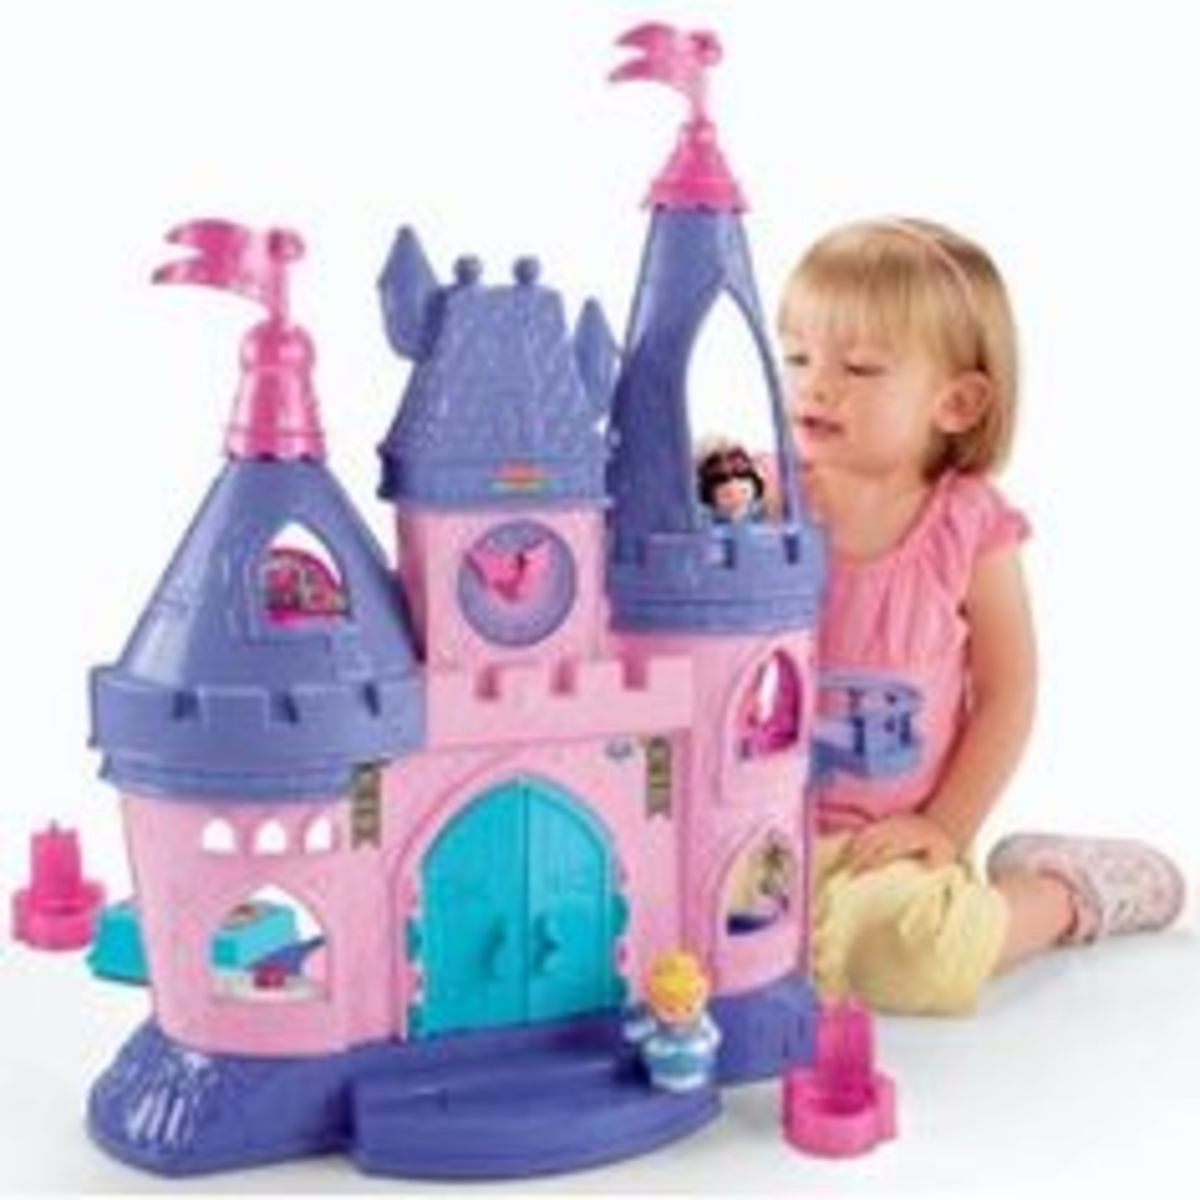 Gifts For A Two Year Old Baby Girl
 Best Christmas Gift Ideas For A 2 Year Old Baby Girl